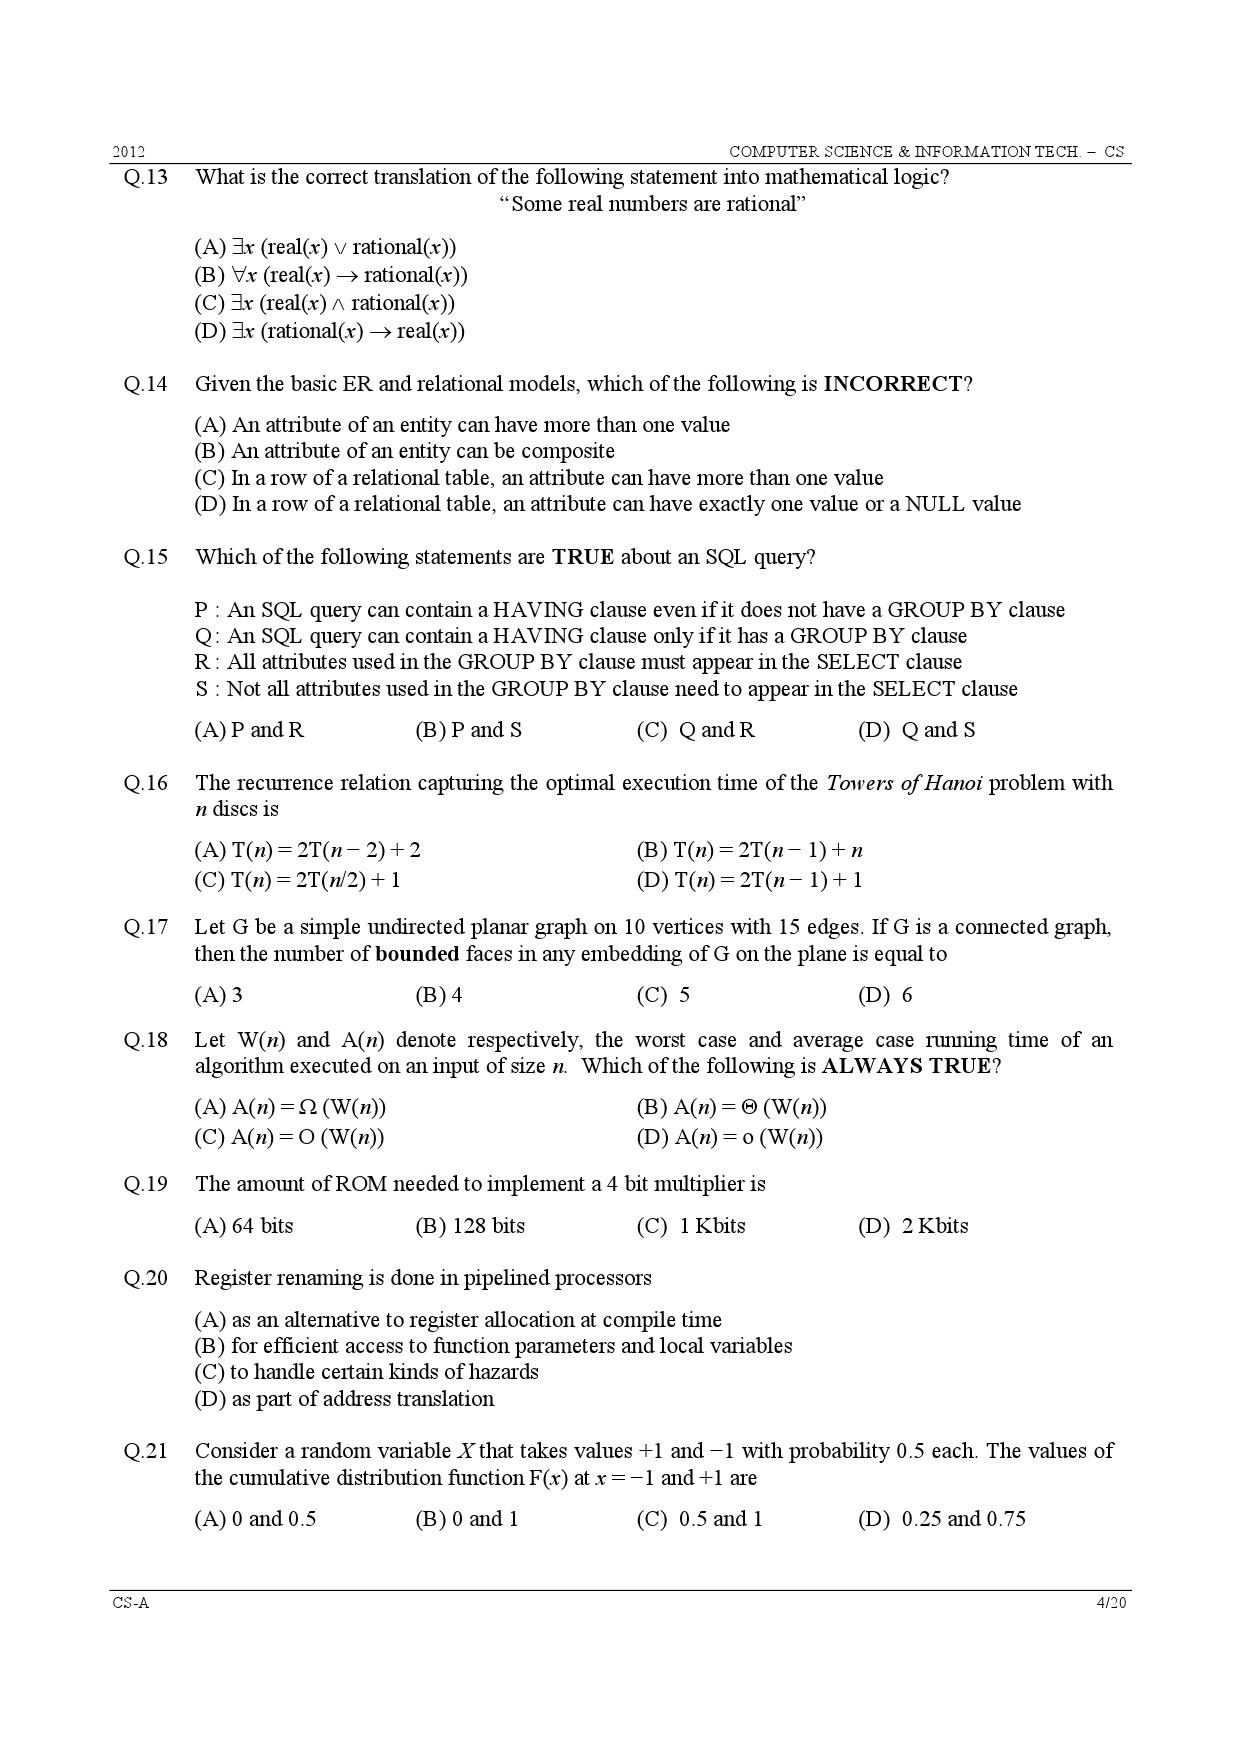 GATE Exam Question Paper 2012 Computer Science and Information Technology 4